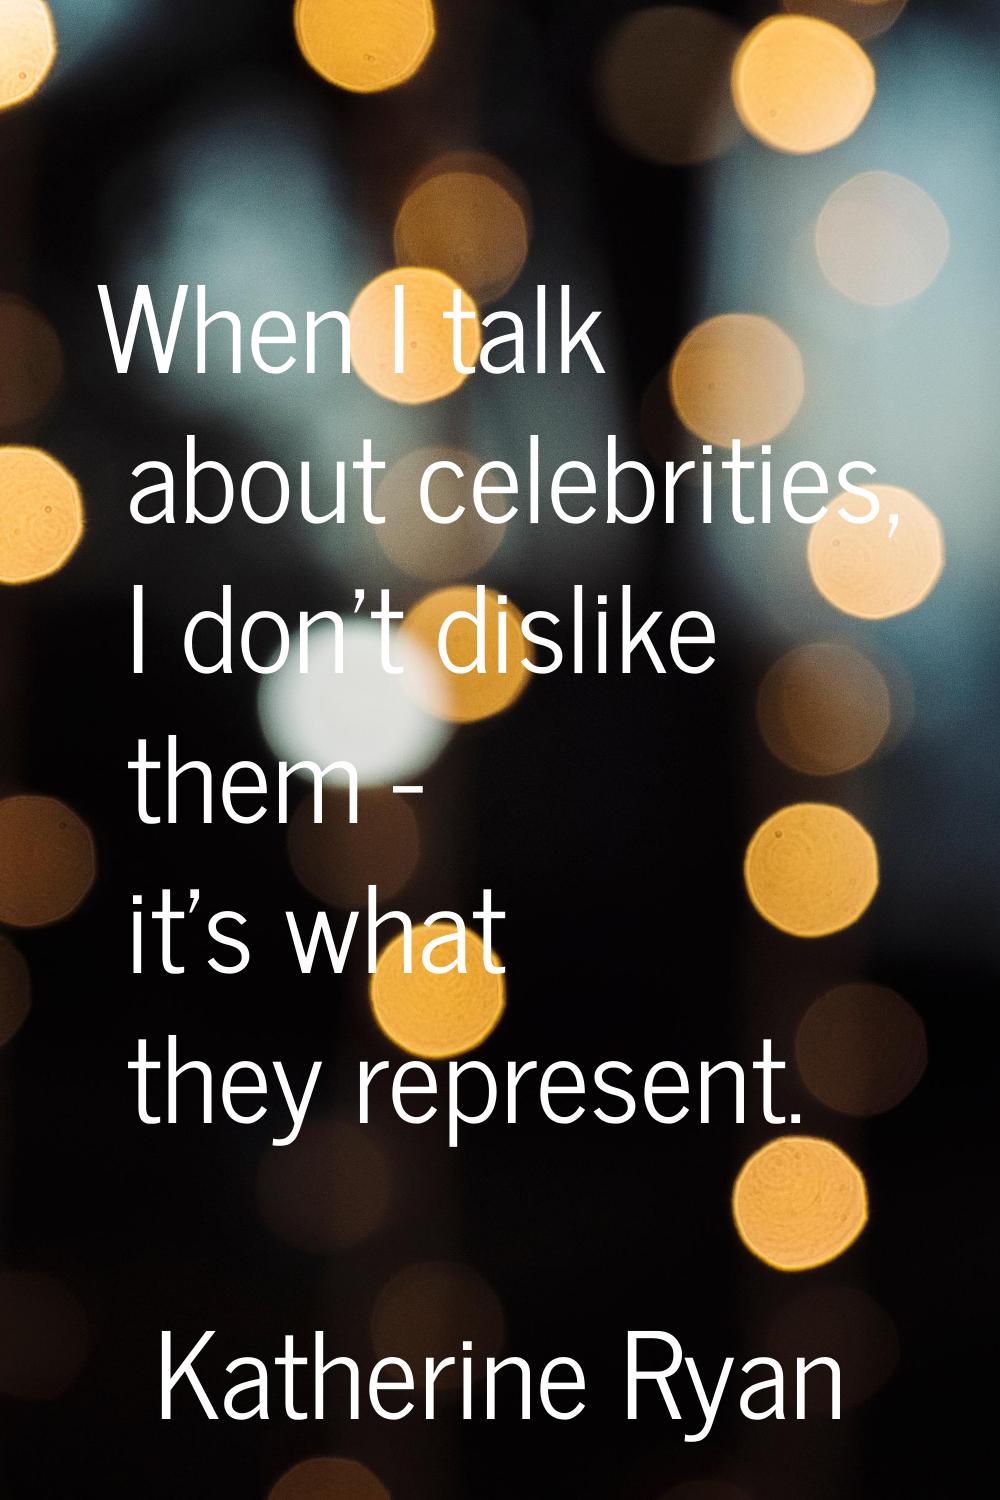 When I talk about celebrities, I don't dislike them - it's what they represent.